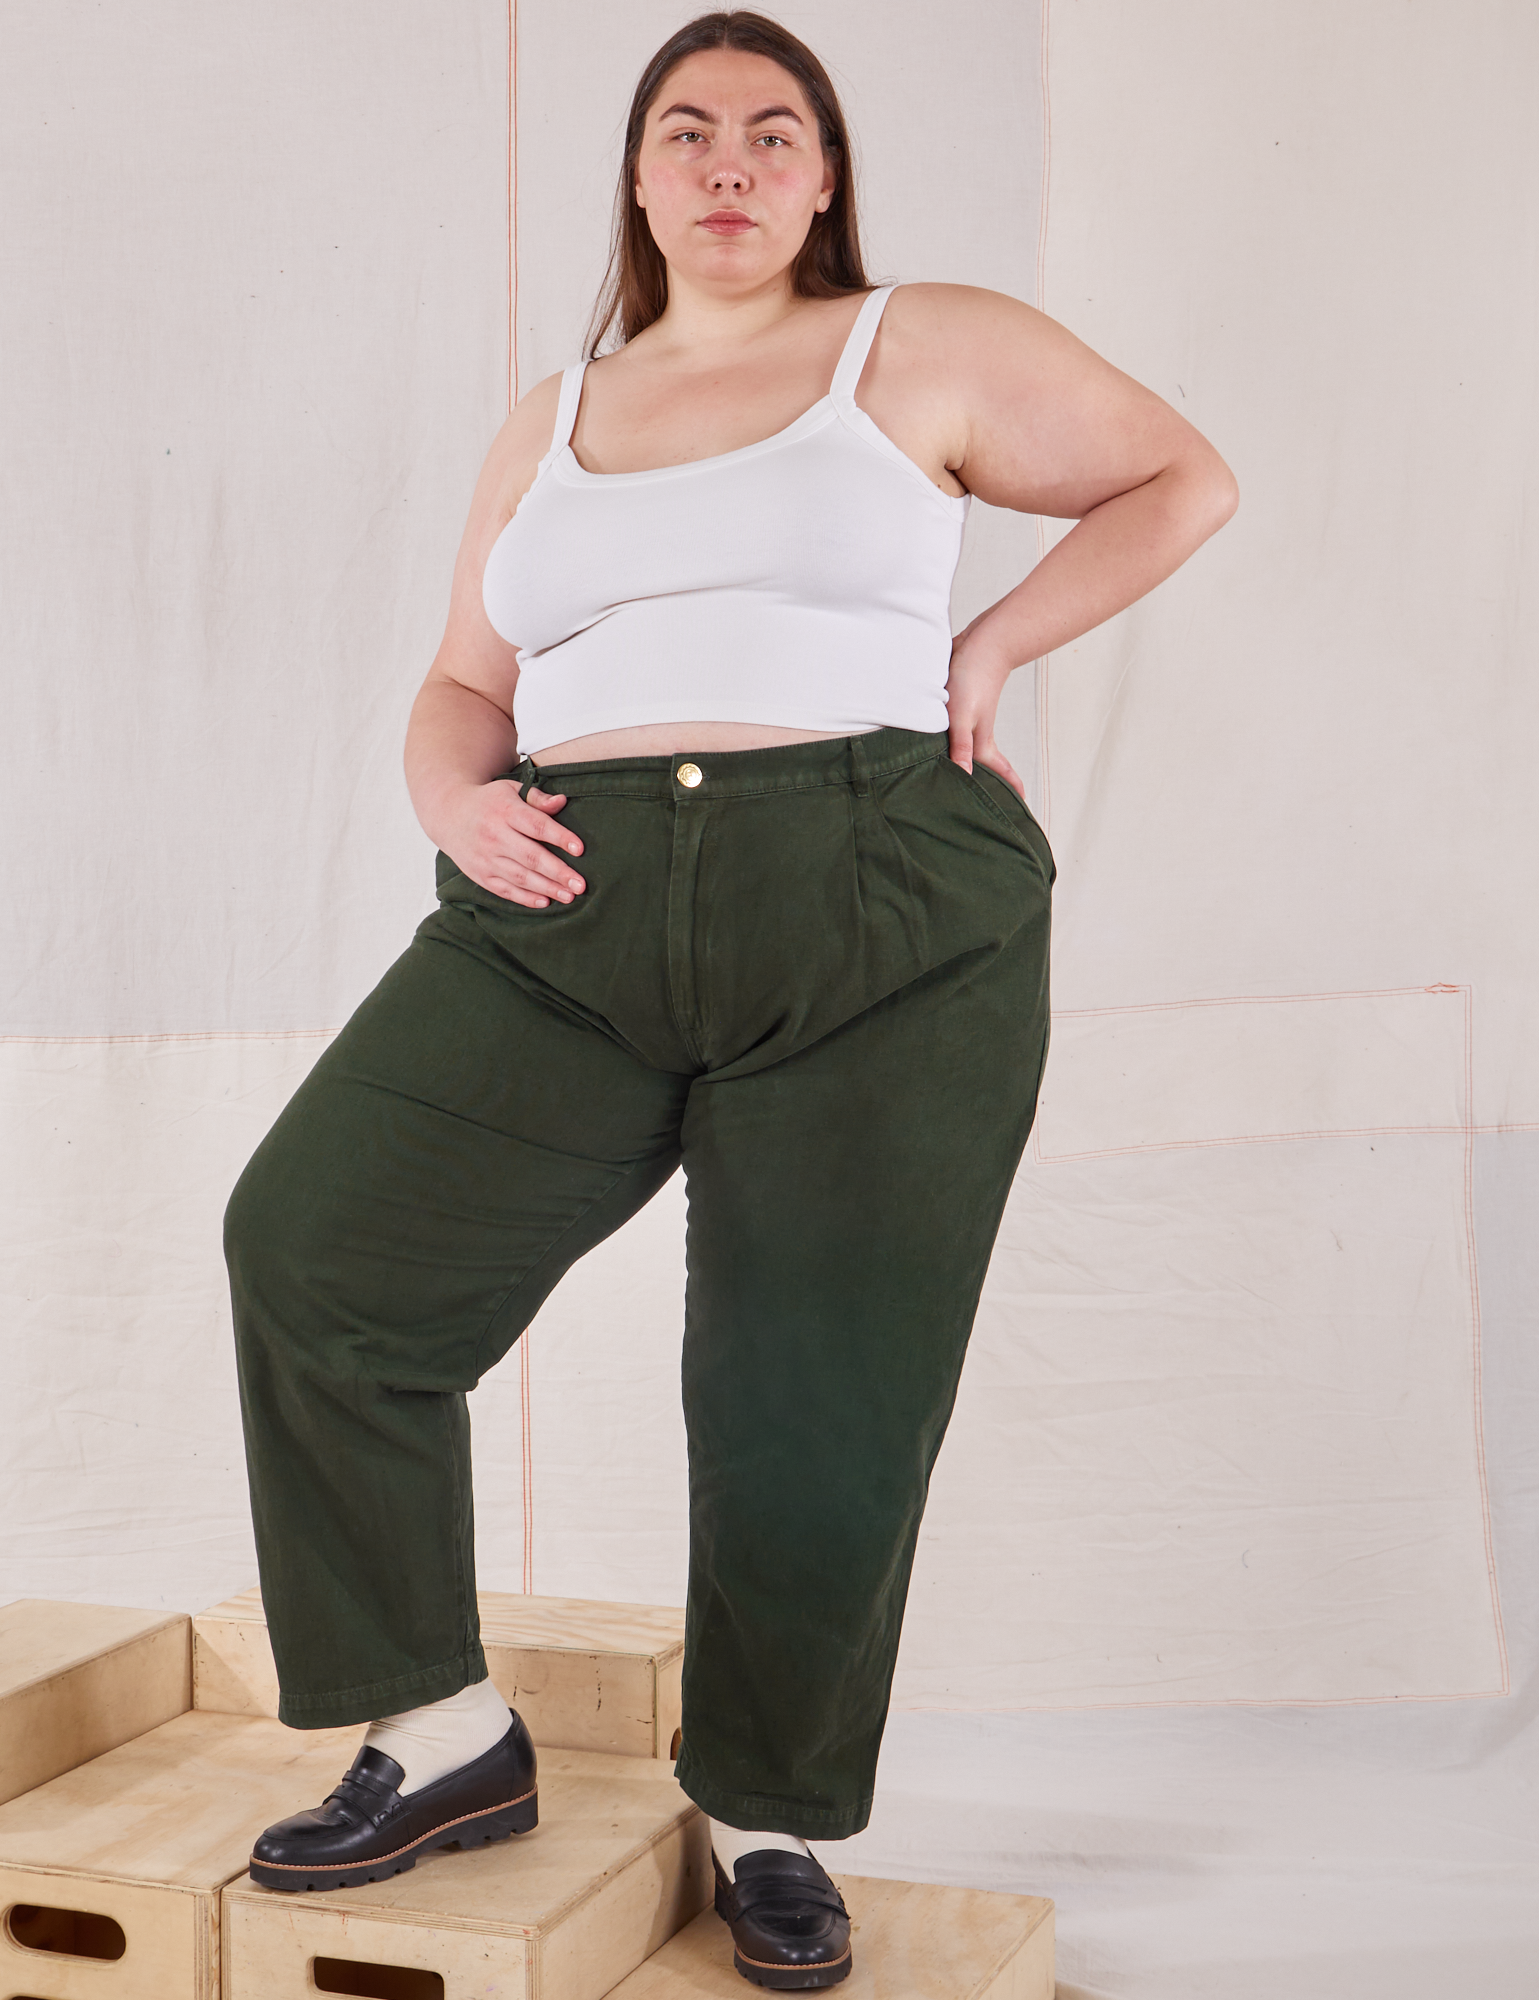 Marielena is wearing Heavyweight Trousers in Swamp Green and Cropped Cami in vintage tee off-white